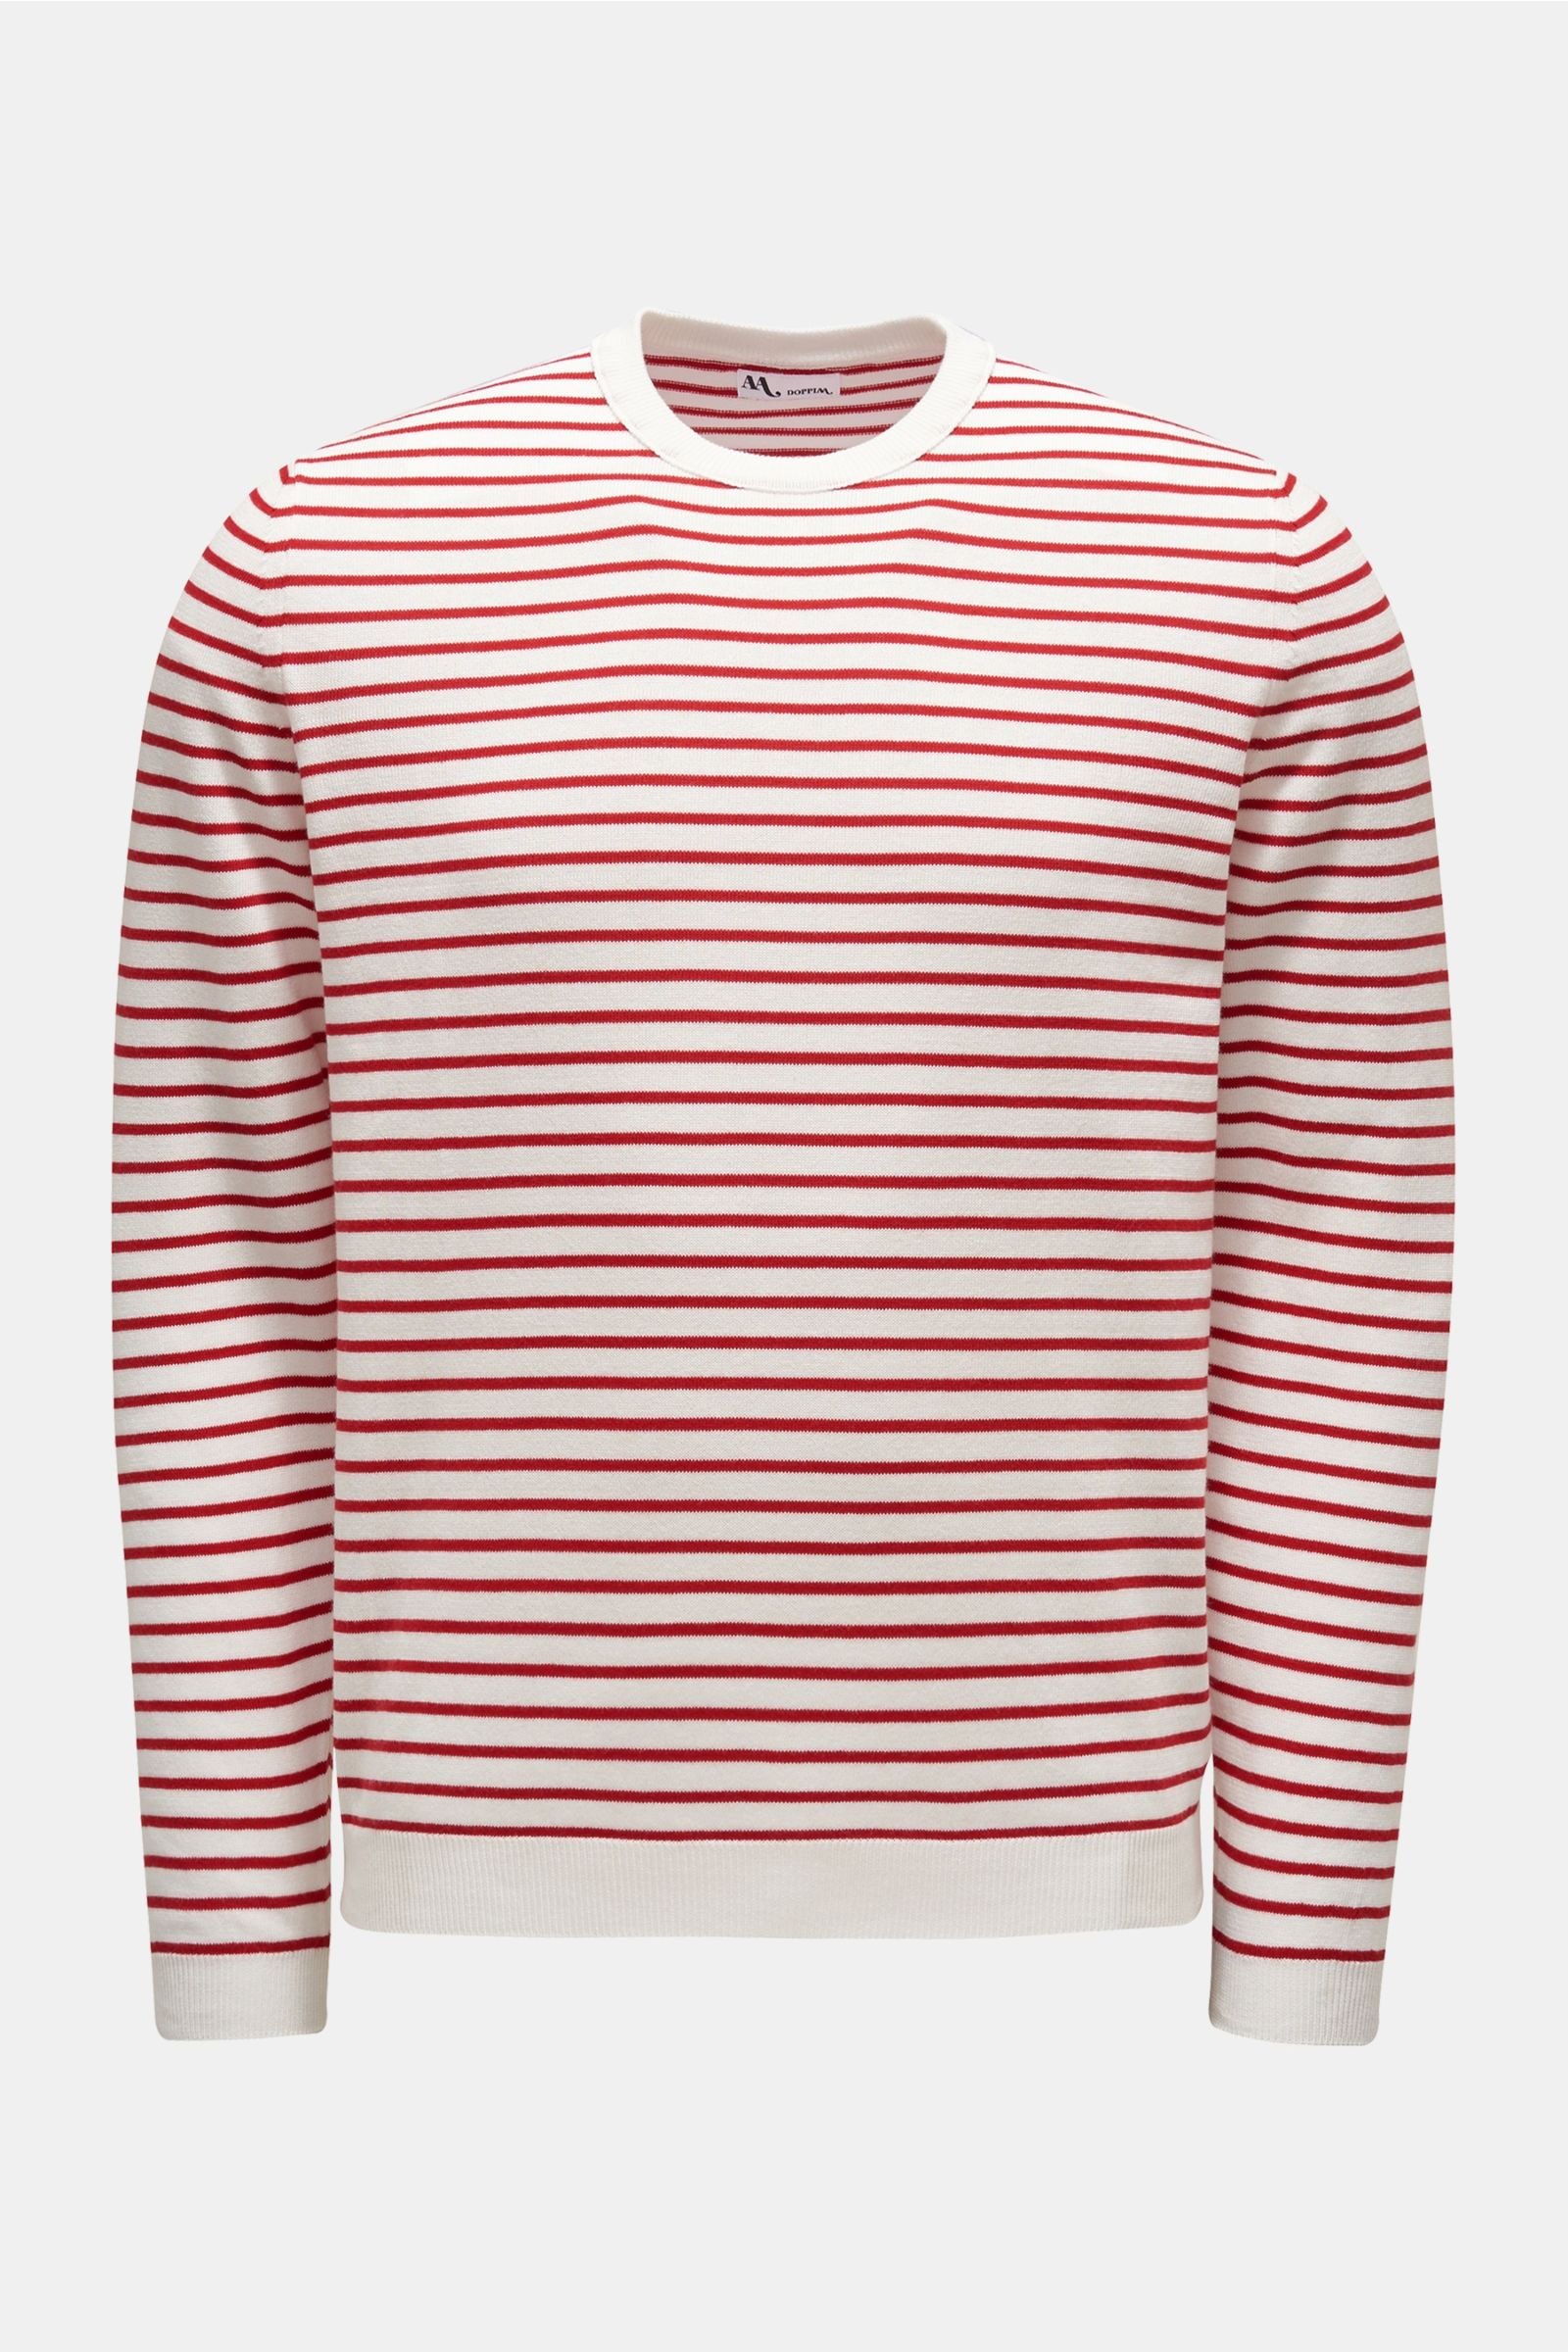 Crew neck jumper 'Aabacco' red/off-white striped